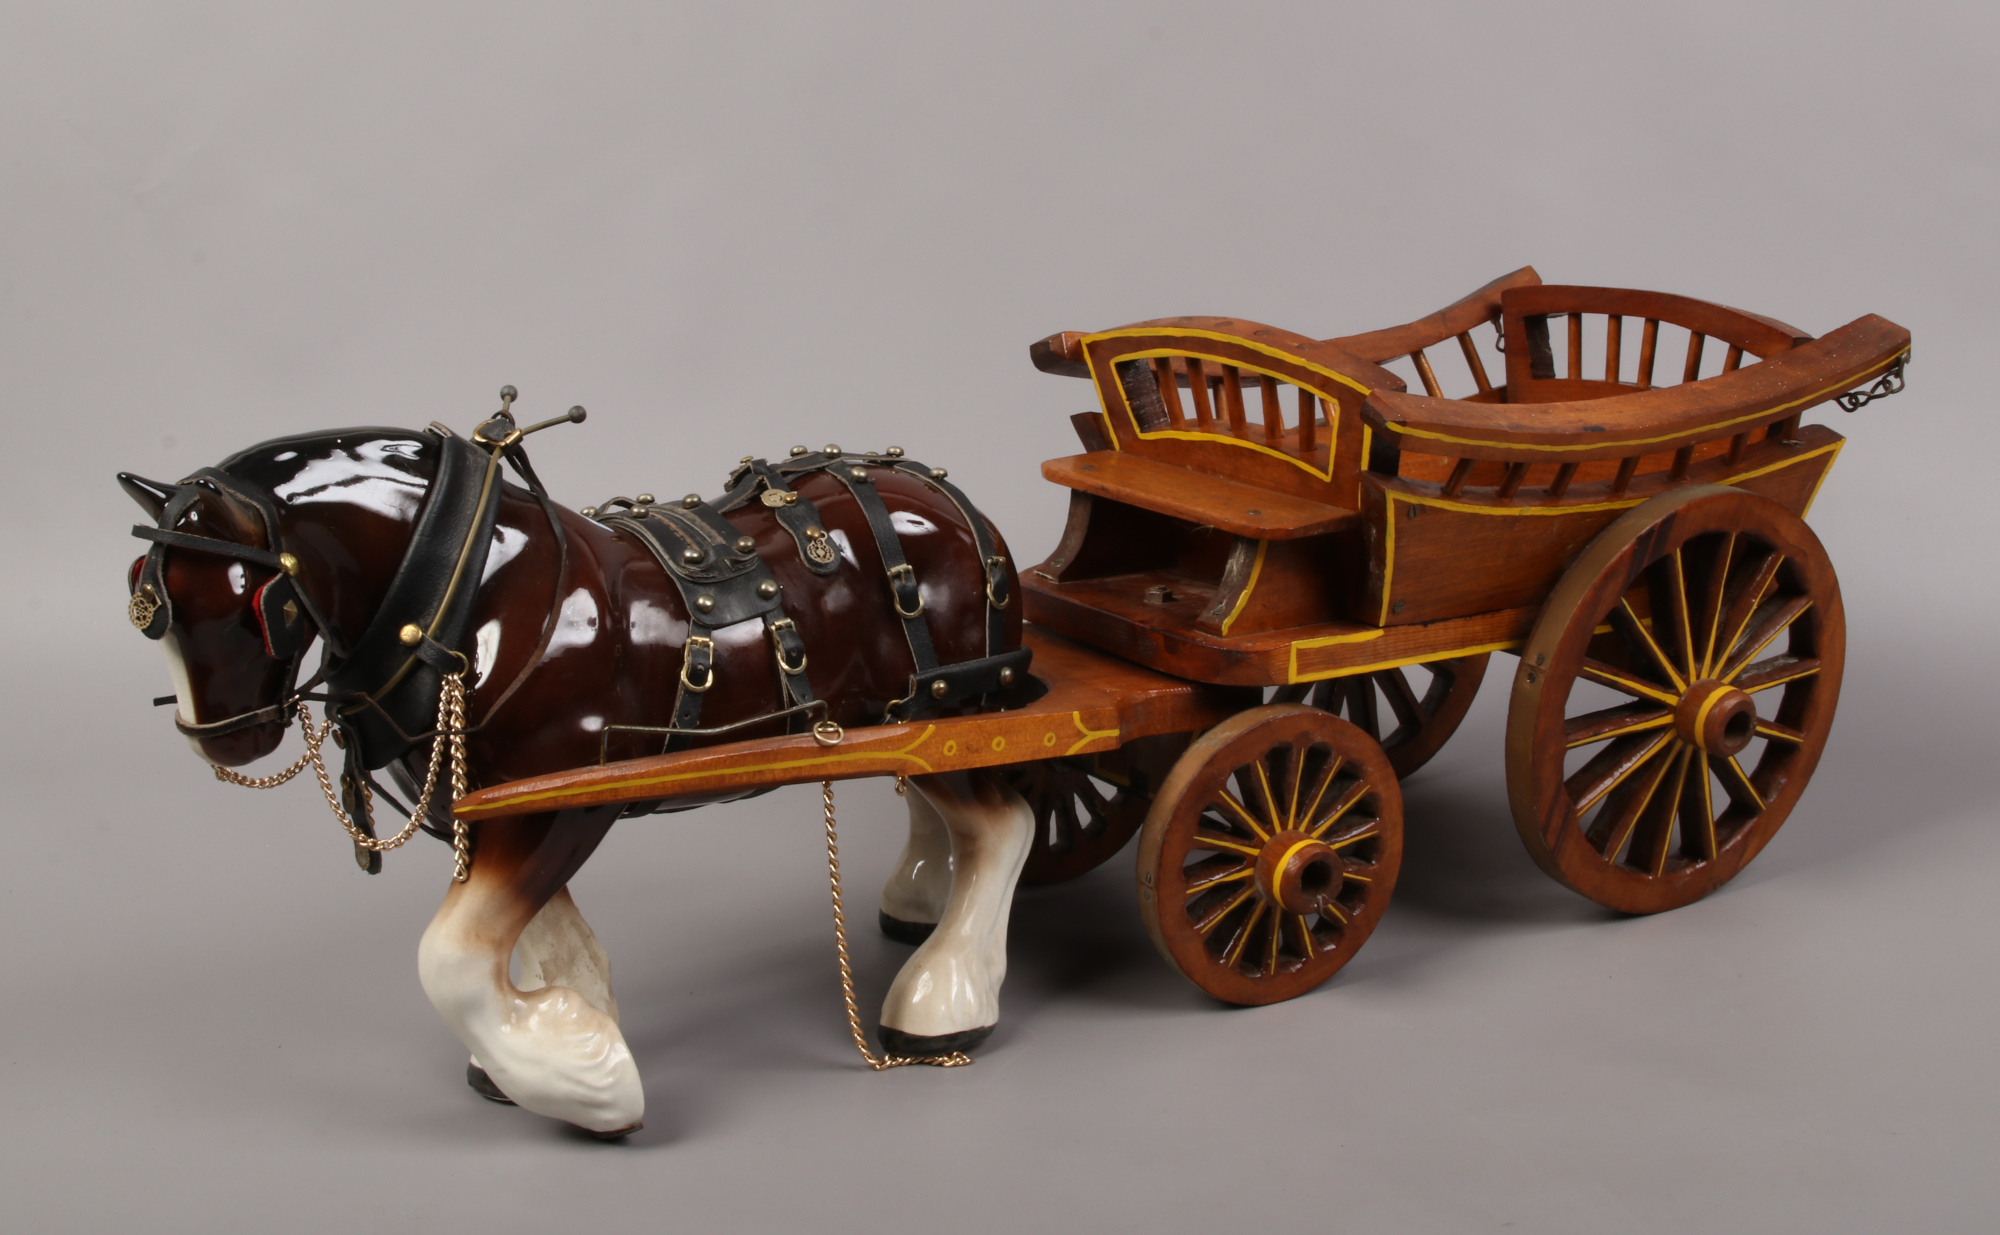 A large ceramic shirehorse in full harness and cart.